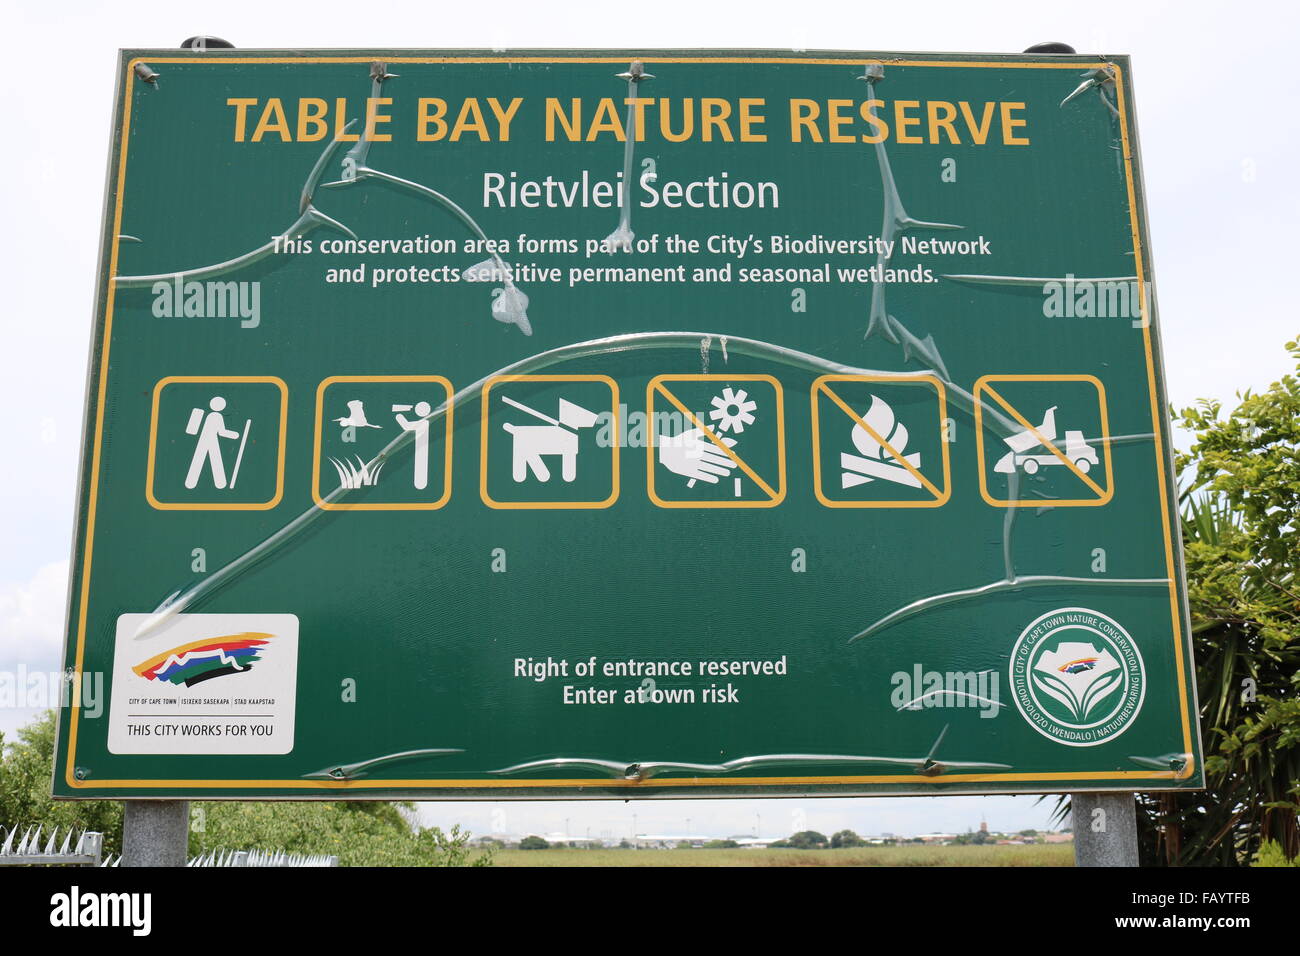 Table Bay nature reserve, Rietvlei, Cape Town South Africa Stock Photo